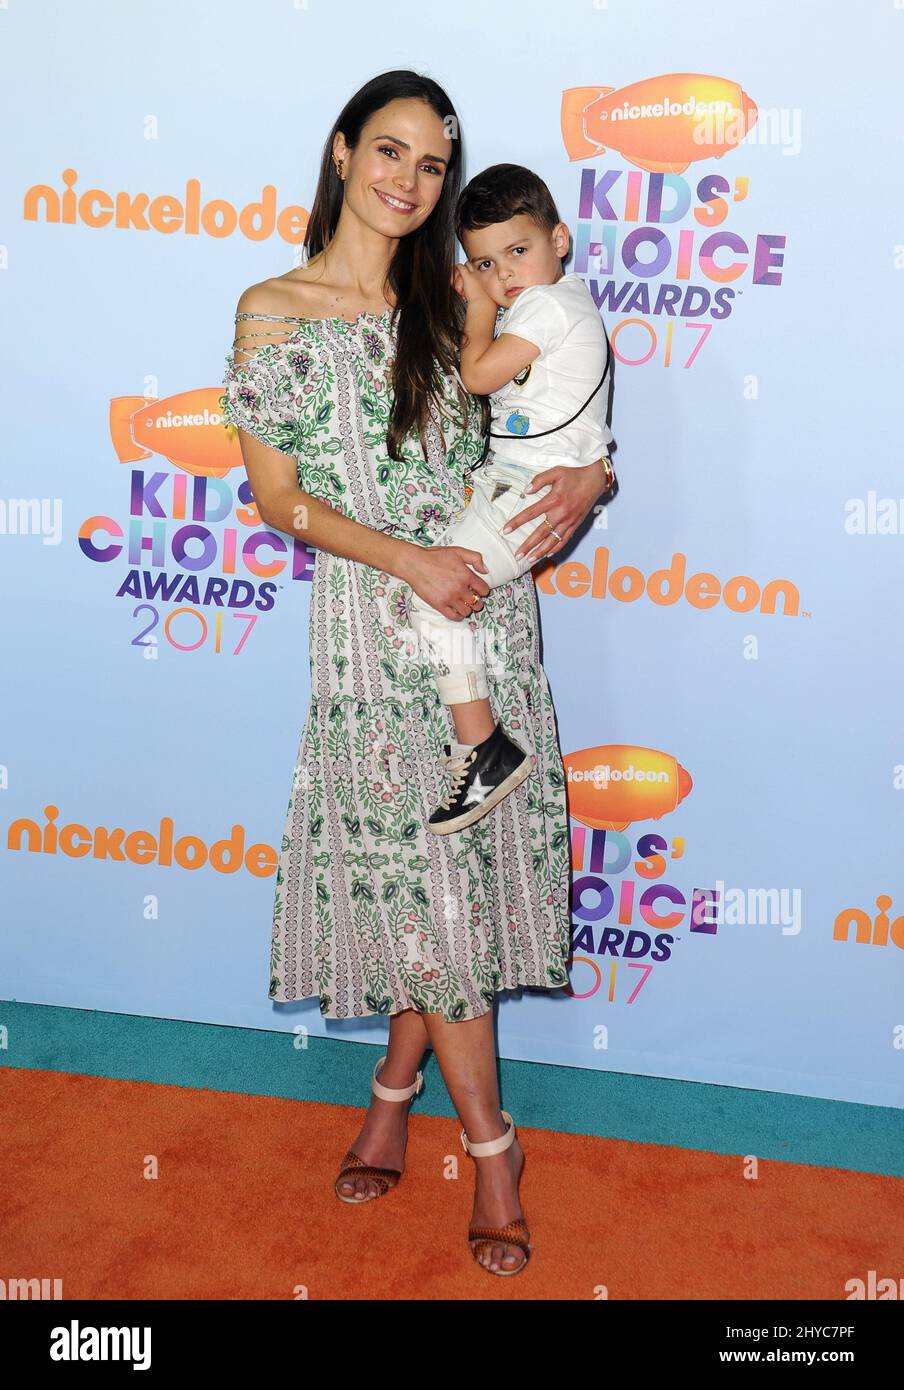 Jordana Brewster arrives at the Kids' Choice Awards 2017 - Arrivals held at USC Galen Center Stock Photo